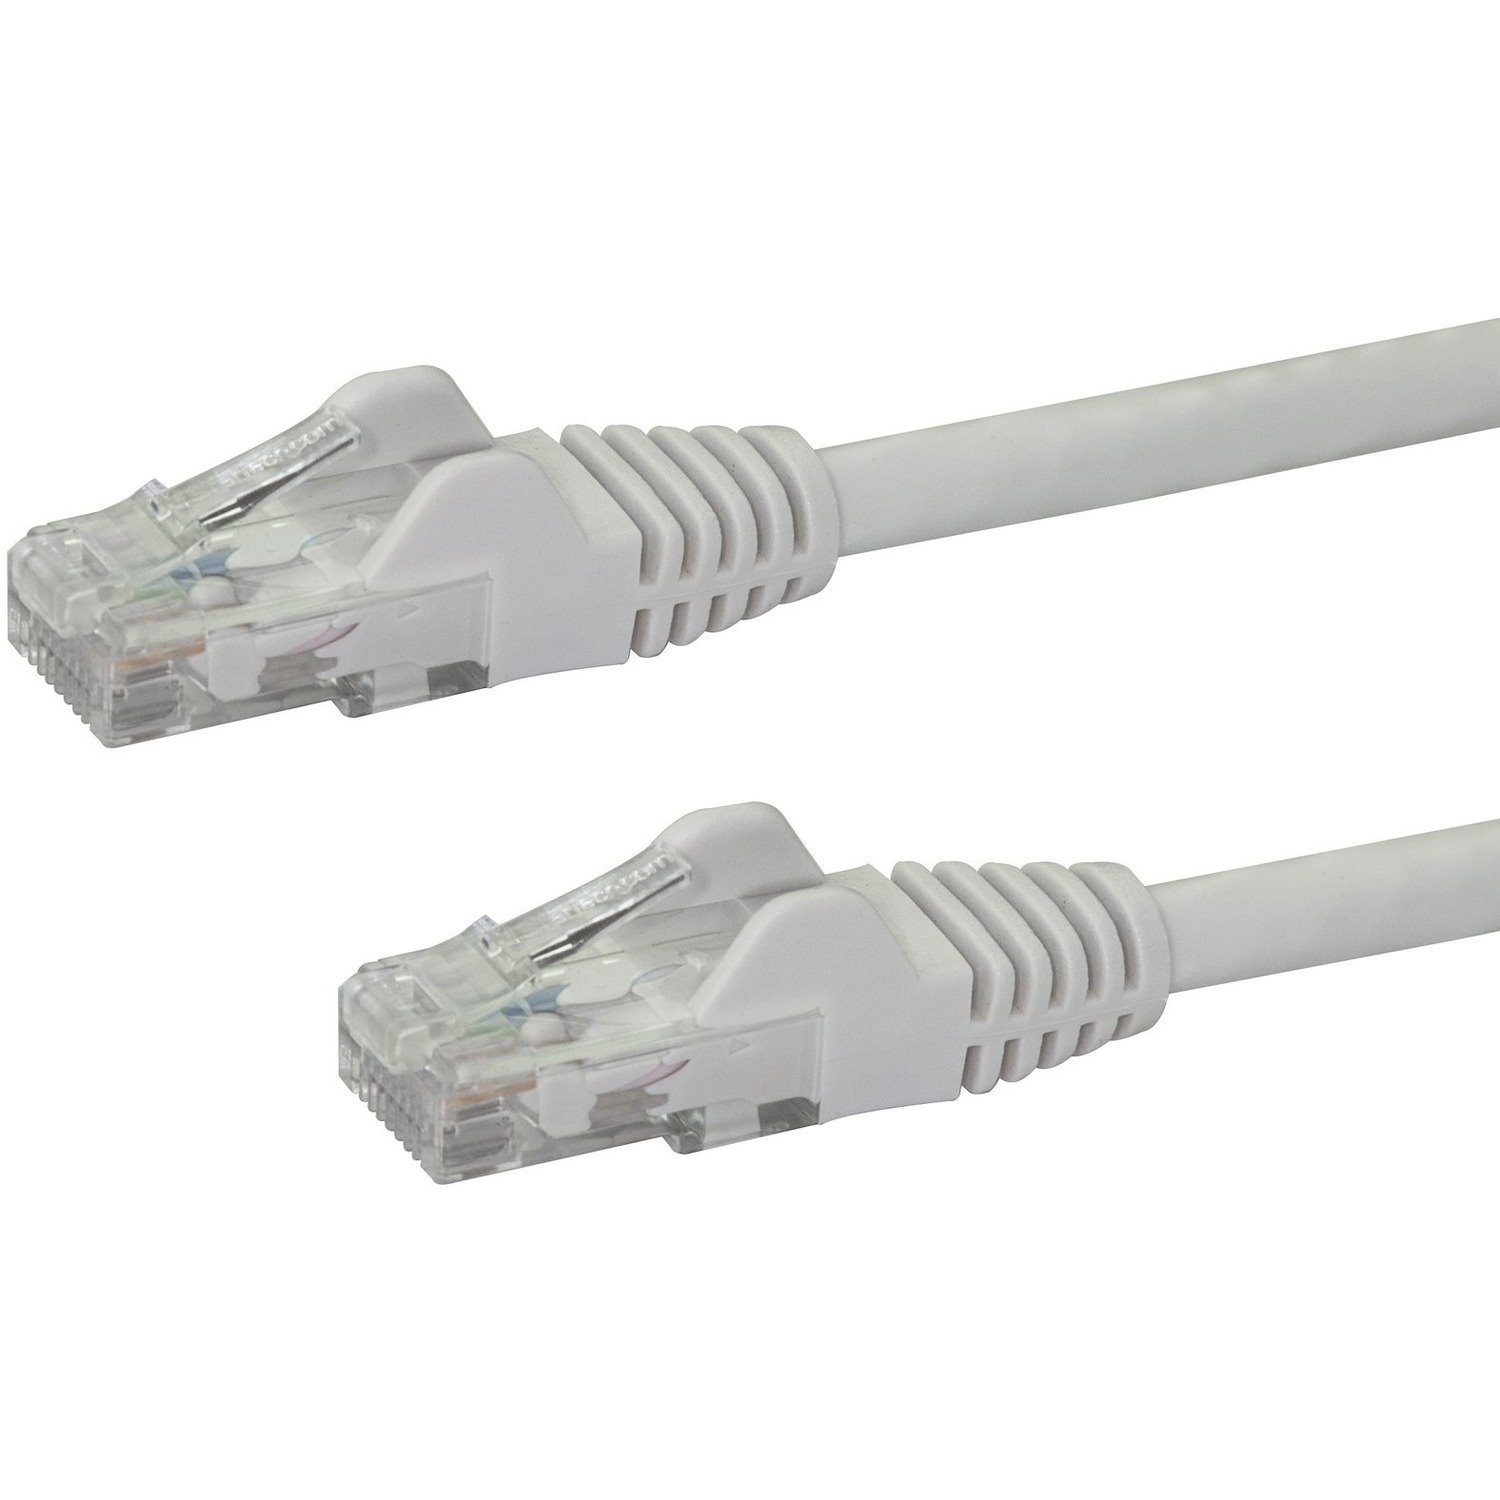 StarTech.com 10 m Category 6 Network Cable for Network Device, Hub, Wall Outlet, Workstation, Distribution Panel, IP Phone - 1